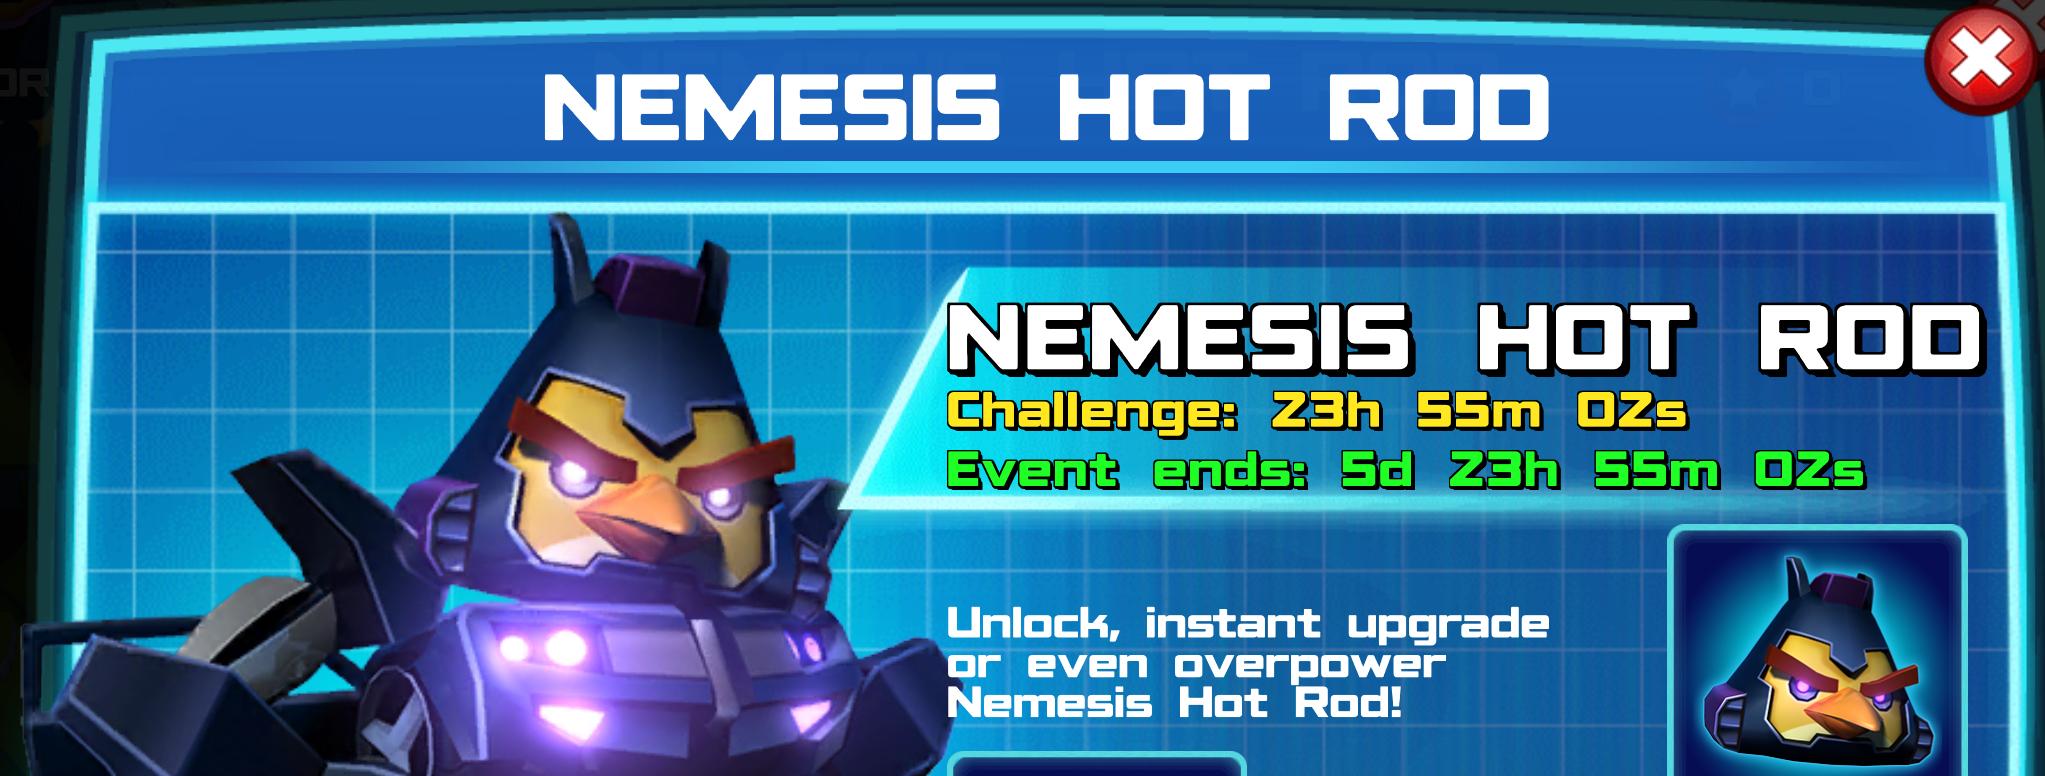 (Part of) The event banner for Nemesis Hot Rod